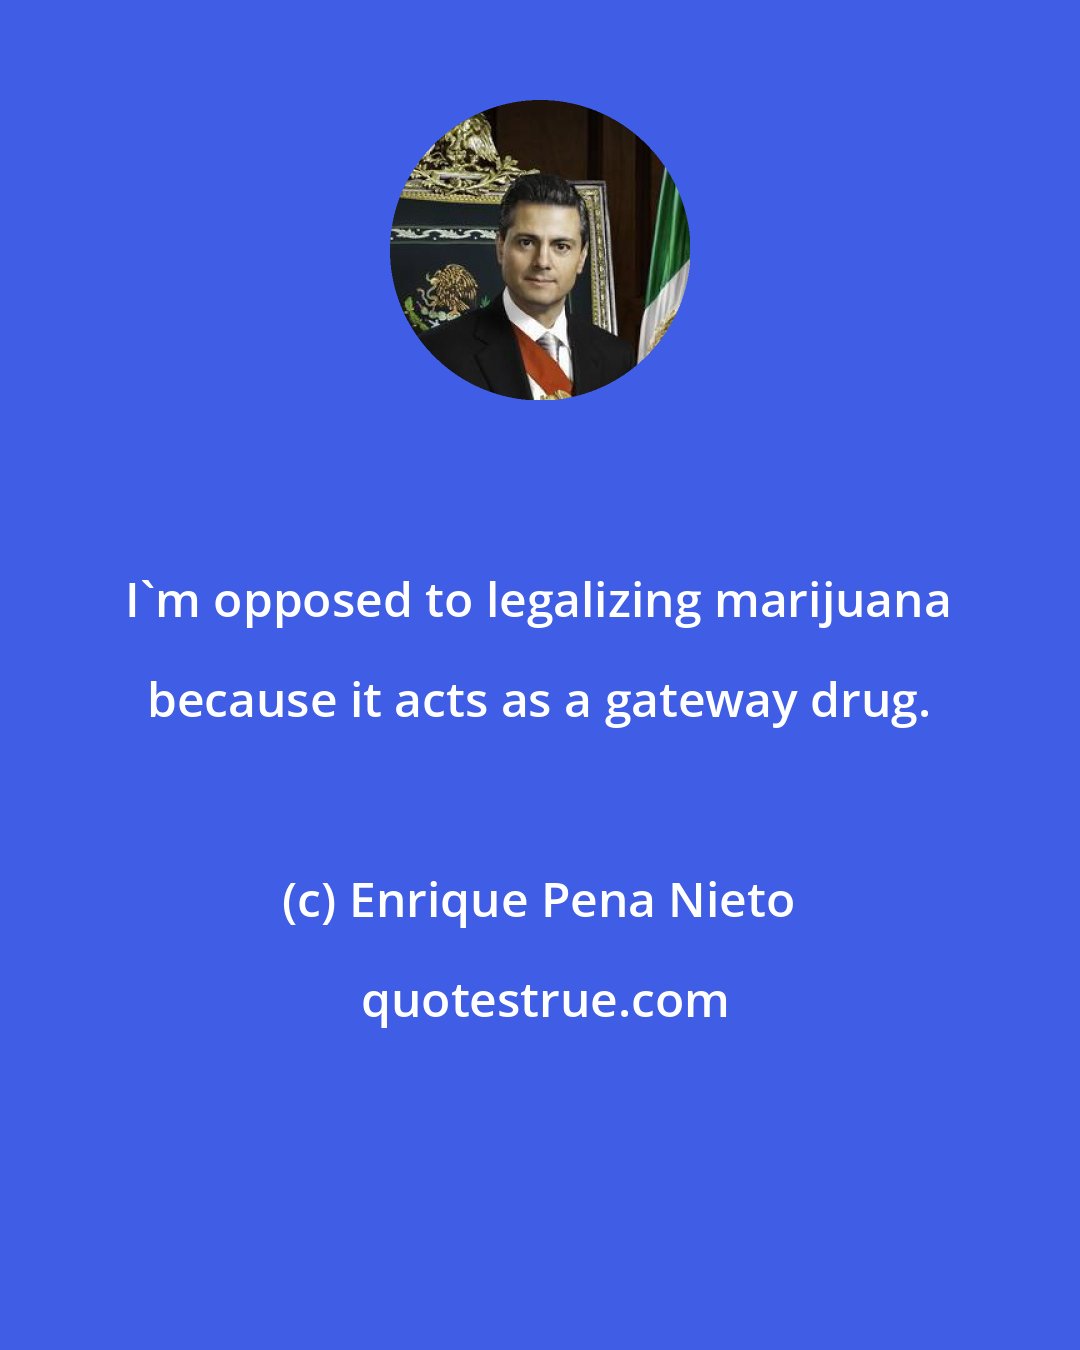 Enrique Pena Nieto: I'm opposed to legalizing marijuana because it acts as a gateway drug.